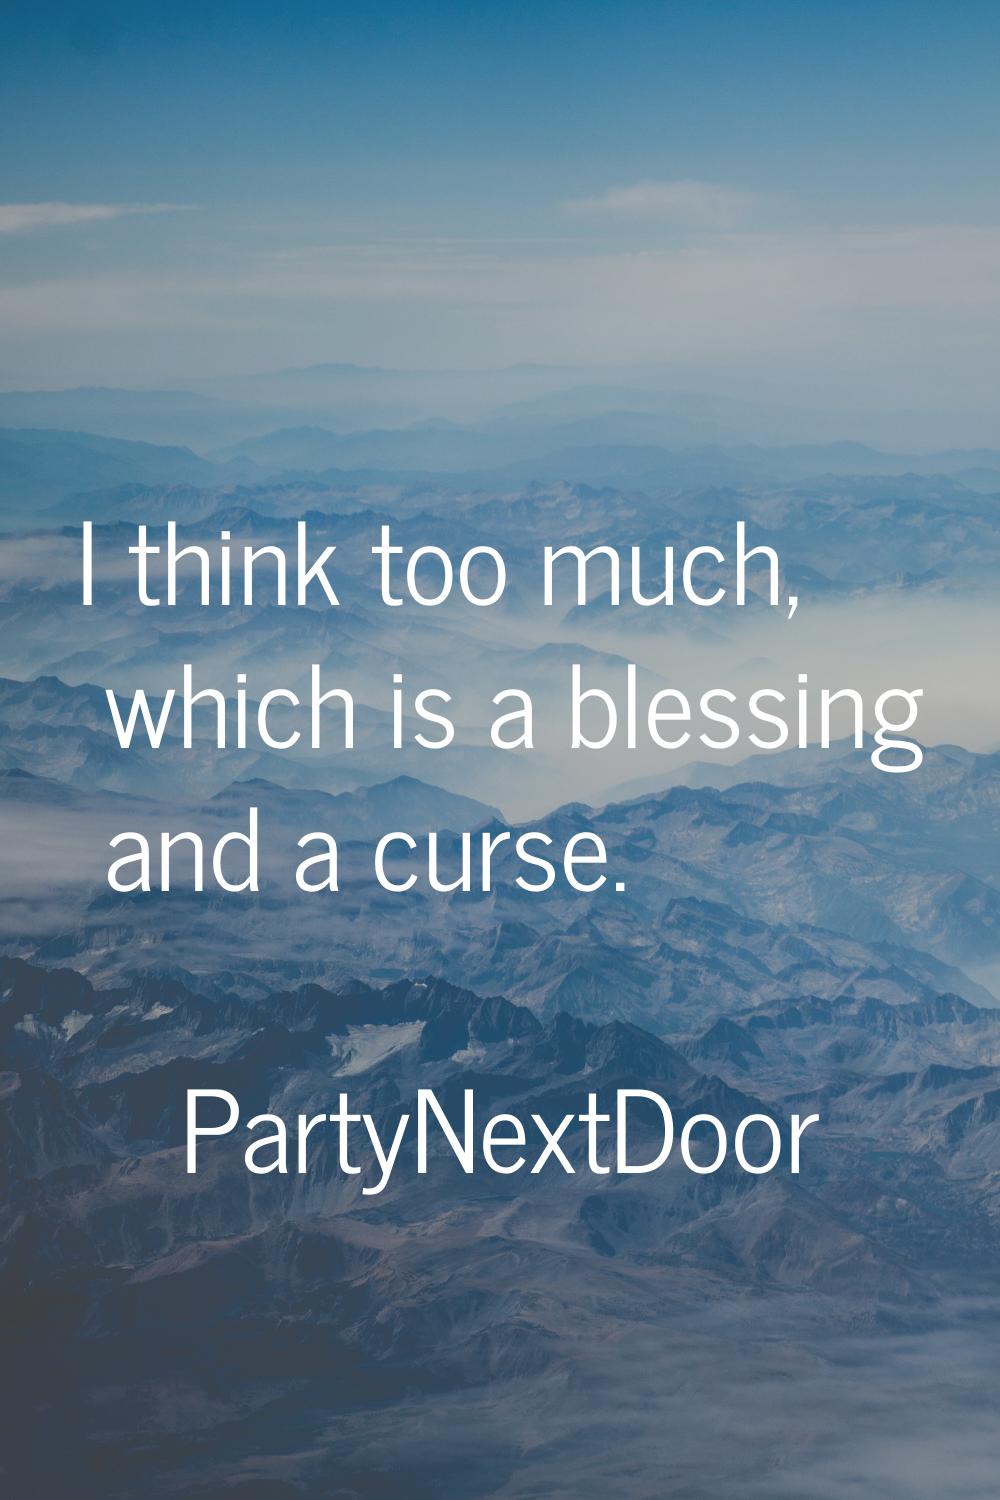 I think too much, which is a blessing and a curse.